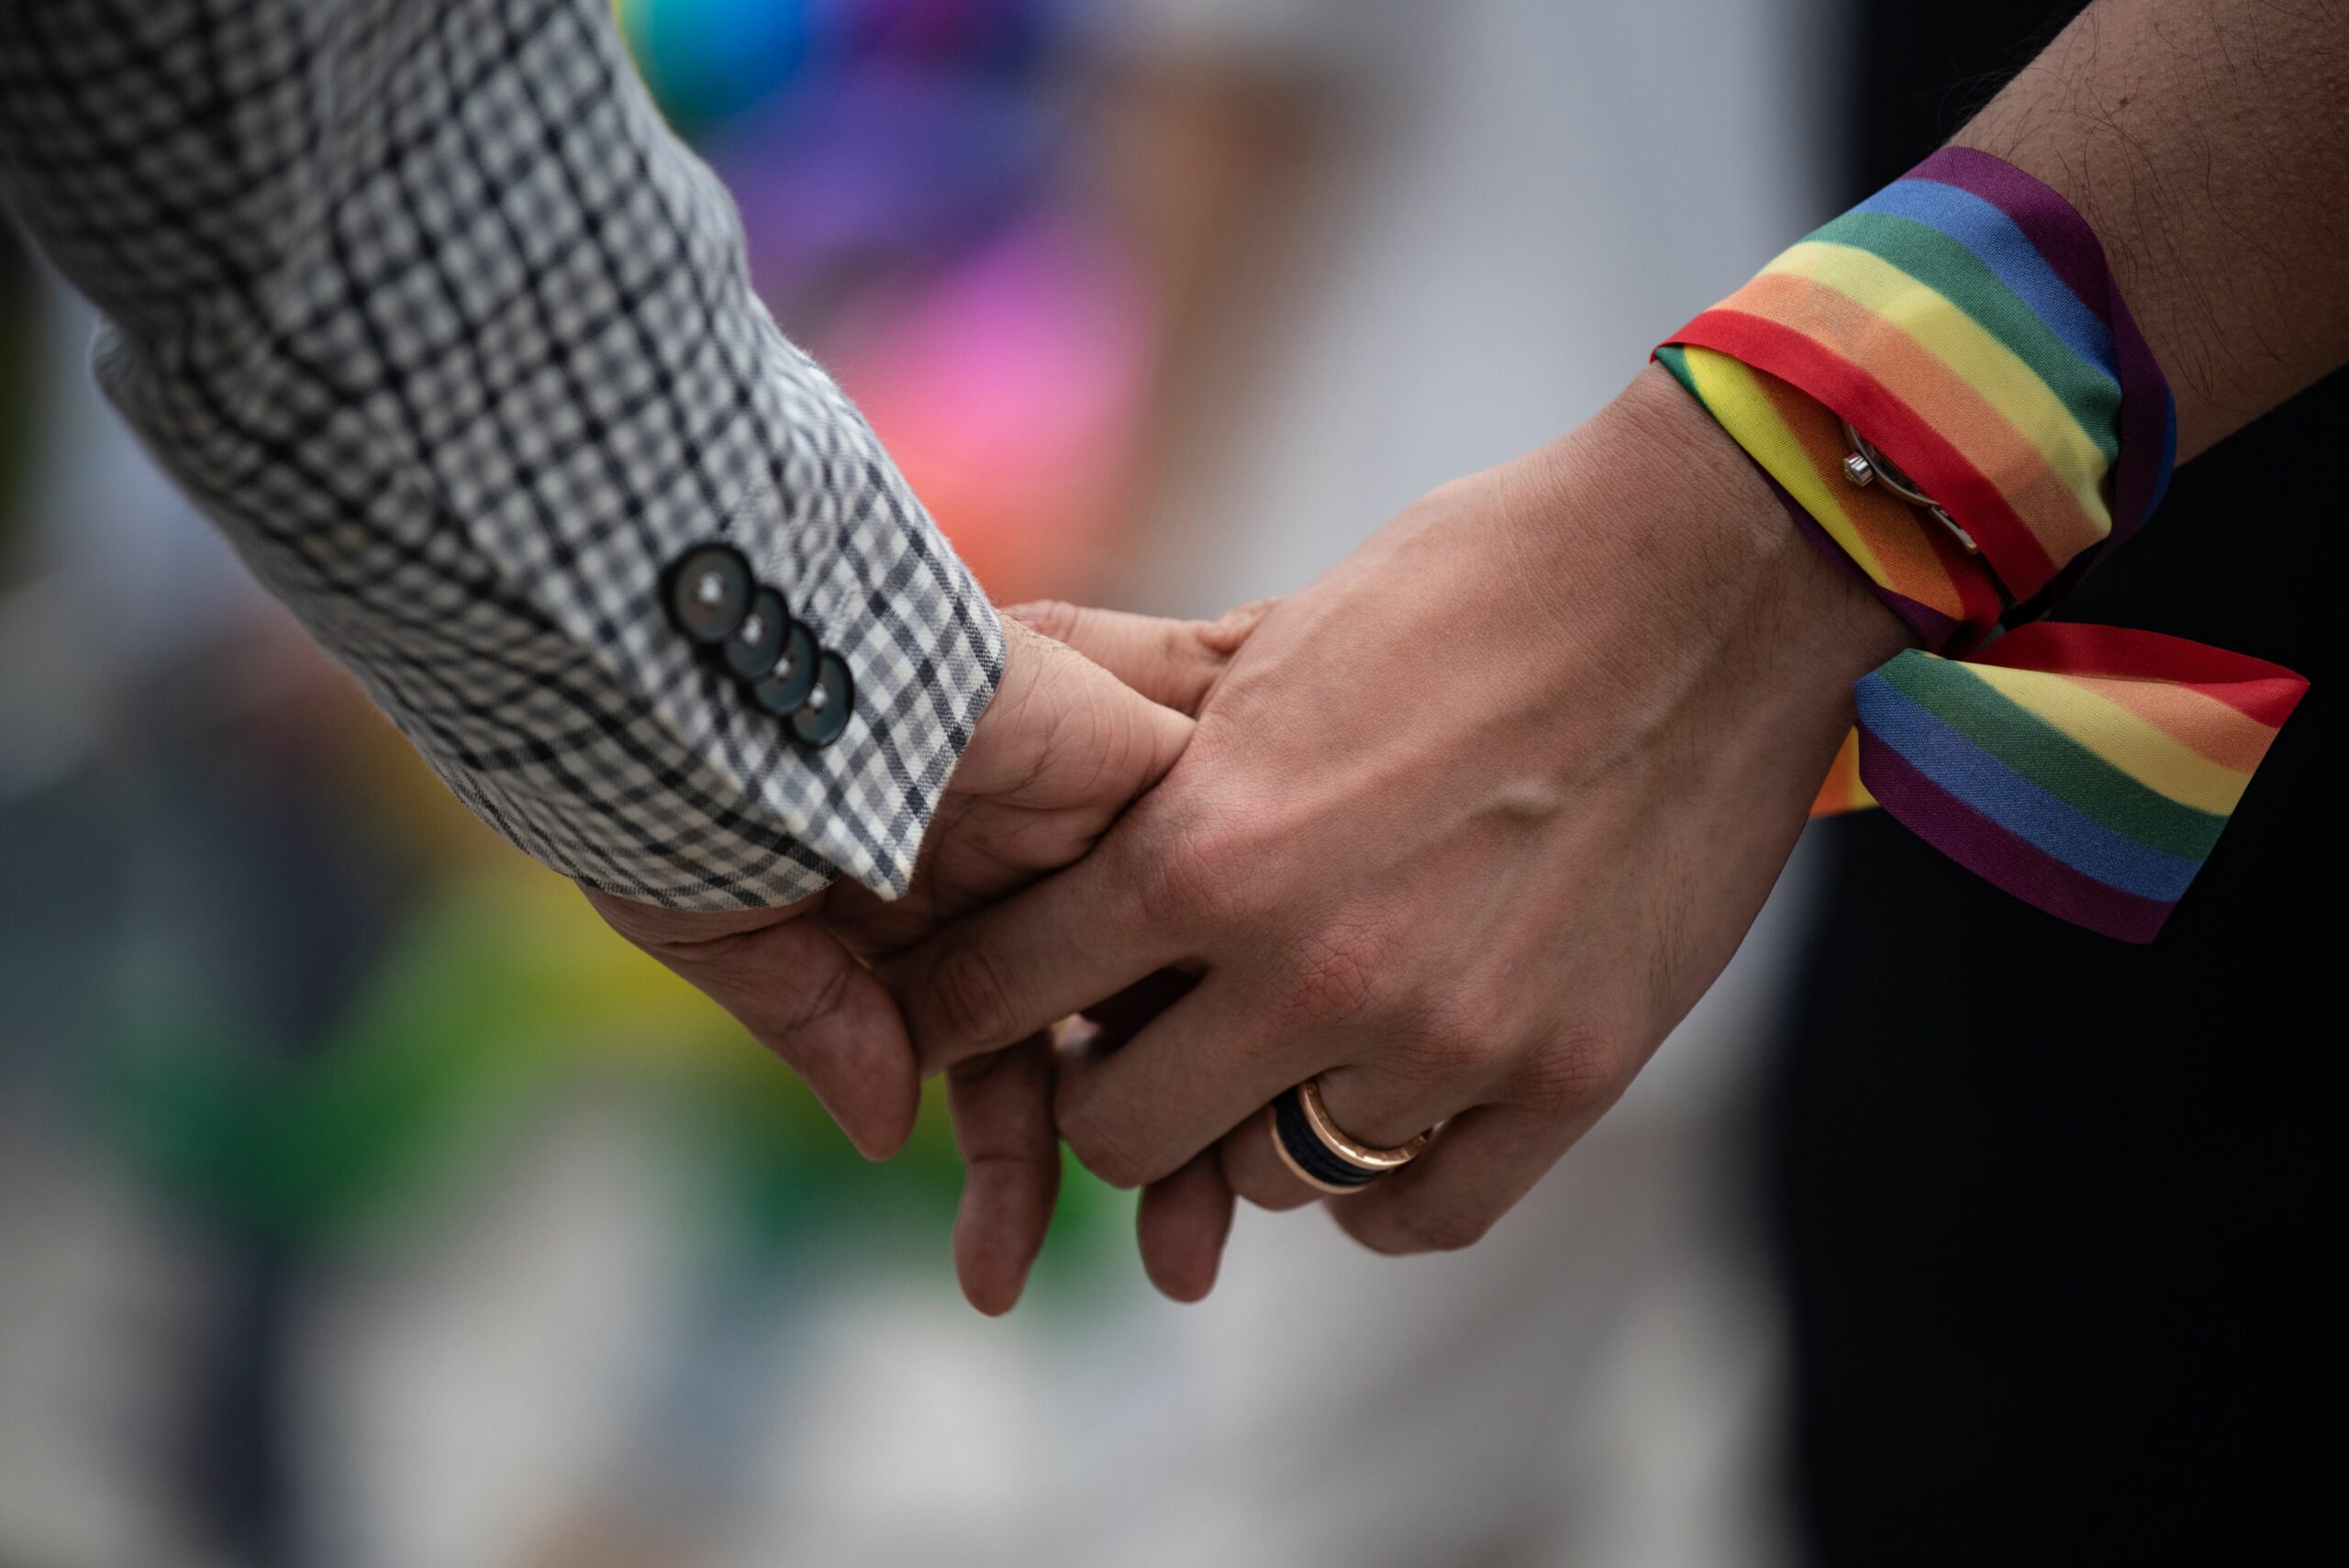 Latin American countries are urged to recognize equal marriage